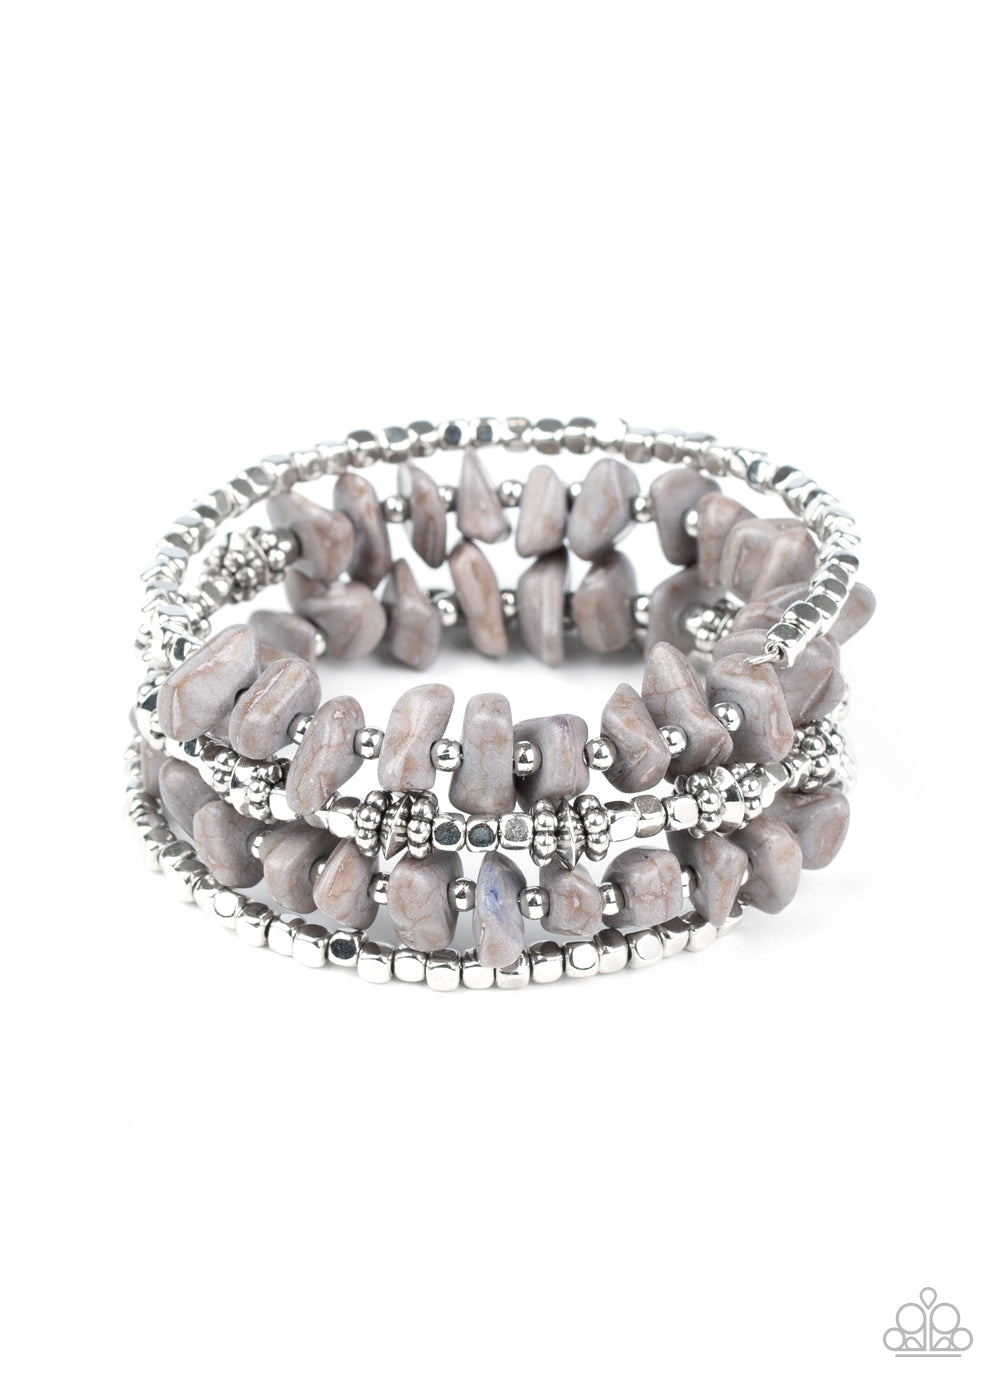 &lt;P&gt;An earthy collision of Sleet stone beads, silver cubes, and decorative silver accents are threaded along a silver wire that coils around the wrist, creating a whimsical infinity wrap bracelet.  &lt;/P&gt;

&lt;P&gt;&lt;I&gt; Sold as one individual bracelet.&lt;/I&gt;&lt;/p&gt;


&lt;img src=\&quot;https://d9b54x484lq62.cloudfront.net/paparazzi/shopping/images/517_tag150x115_1.png\&quot; alt=\&quot;New Kit\&quot; align=\&quot;middle\&quot; height=\&quot;50\&quot; width=\&quot;50\&quot;/&gt;